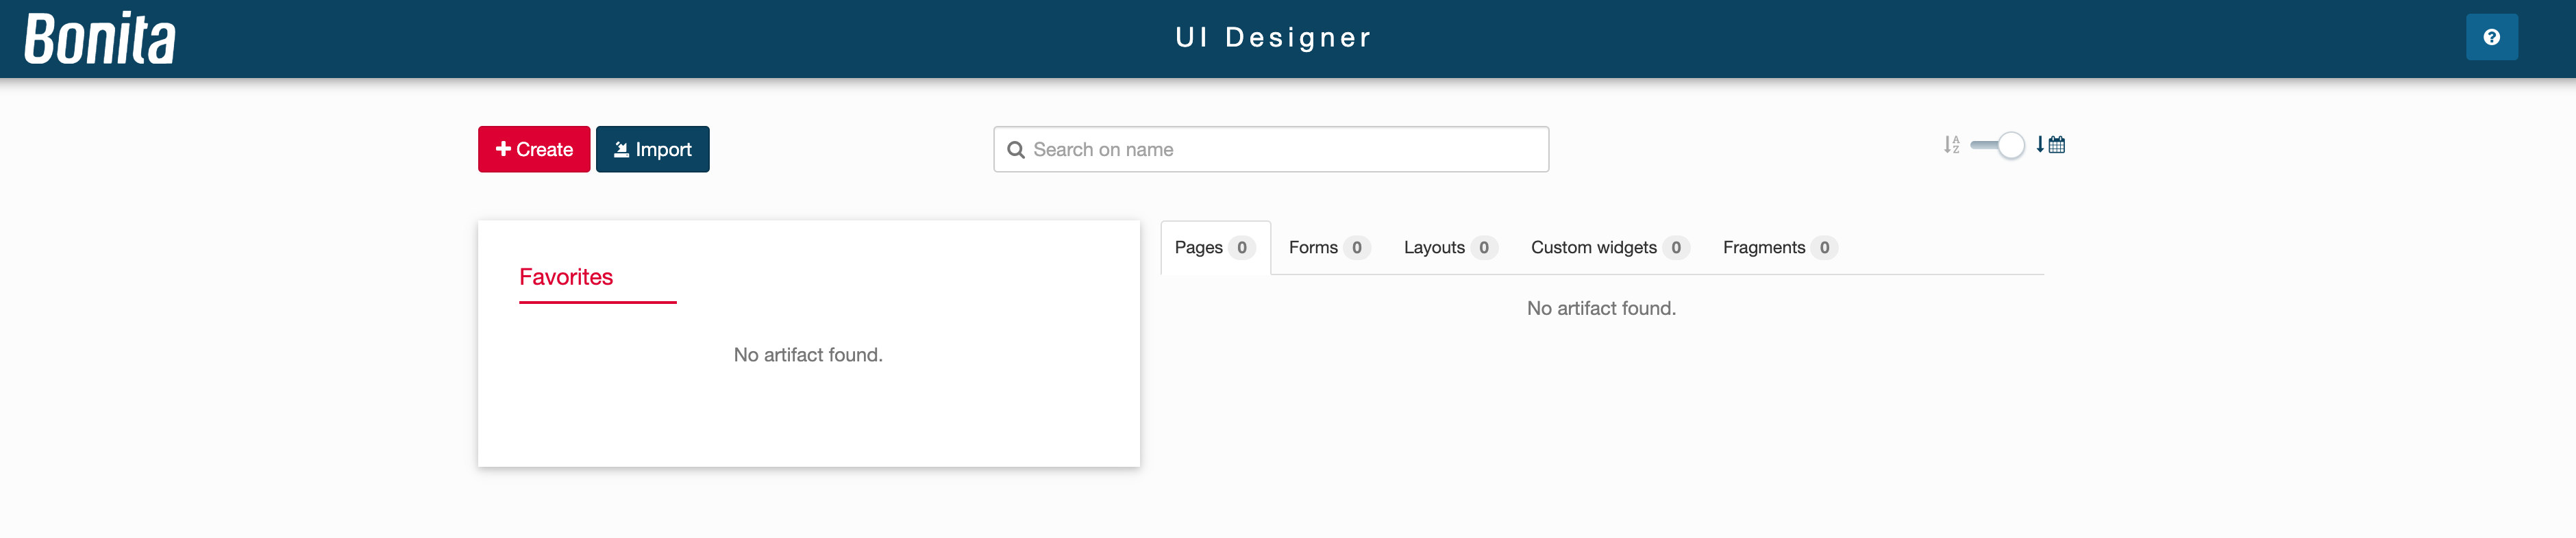 UI Designer on first launch displayed in a web browser